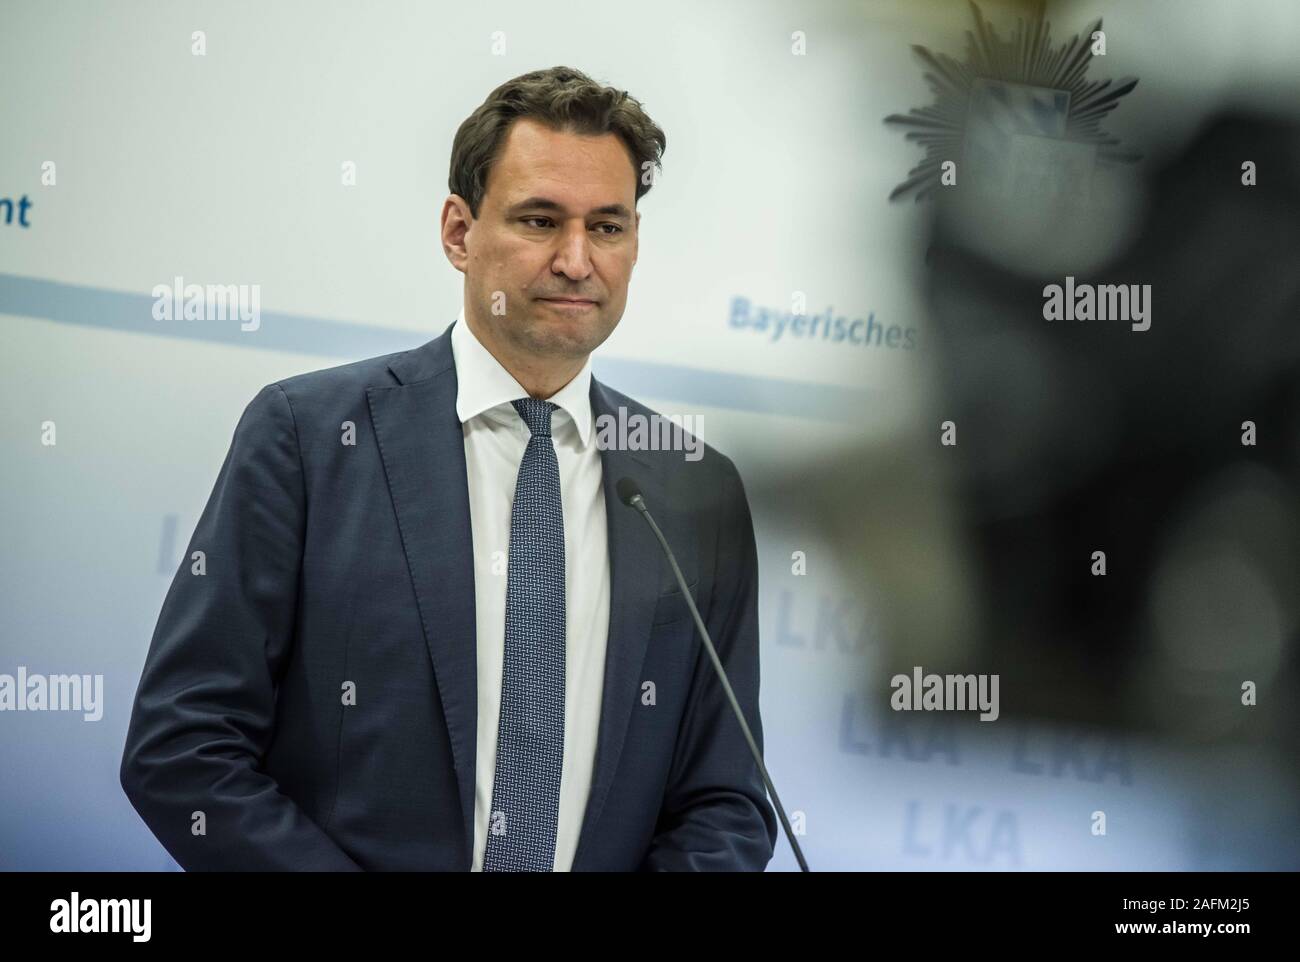 Munich, Bavaria, Germany. 16th Dec, 2019. GEORG EISEINREICH, Justice Minister of Bavaria. Bavarian Interior Minister Joachim Herrmann, Justice Minister George Eisenreich, Bavarian Landeskriminalamt (Crime Office) preisdent Robert Heimberger, and Bavarian Attorney General Reinhard RÃ¶ttle (Reinhard Roettle) presented the results of the war on organized crime in Bavaria, In 2018 alone, the damages to the state totaled some 169 million Euros, a staggering increase from 2017's figure of 12 million. Processes against organized crime have cost the state some 76 million Euros. In addition to Stock Photo